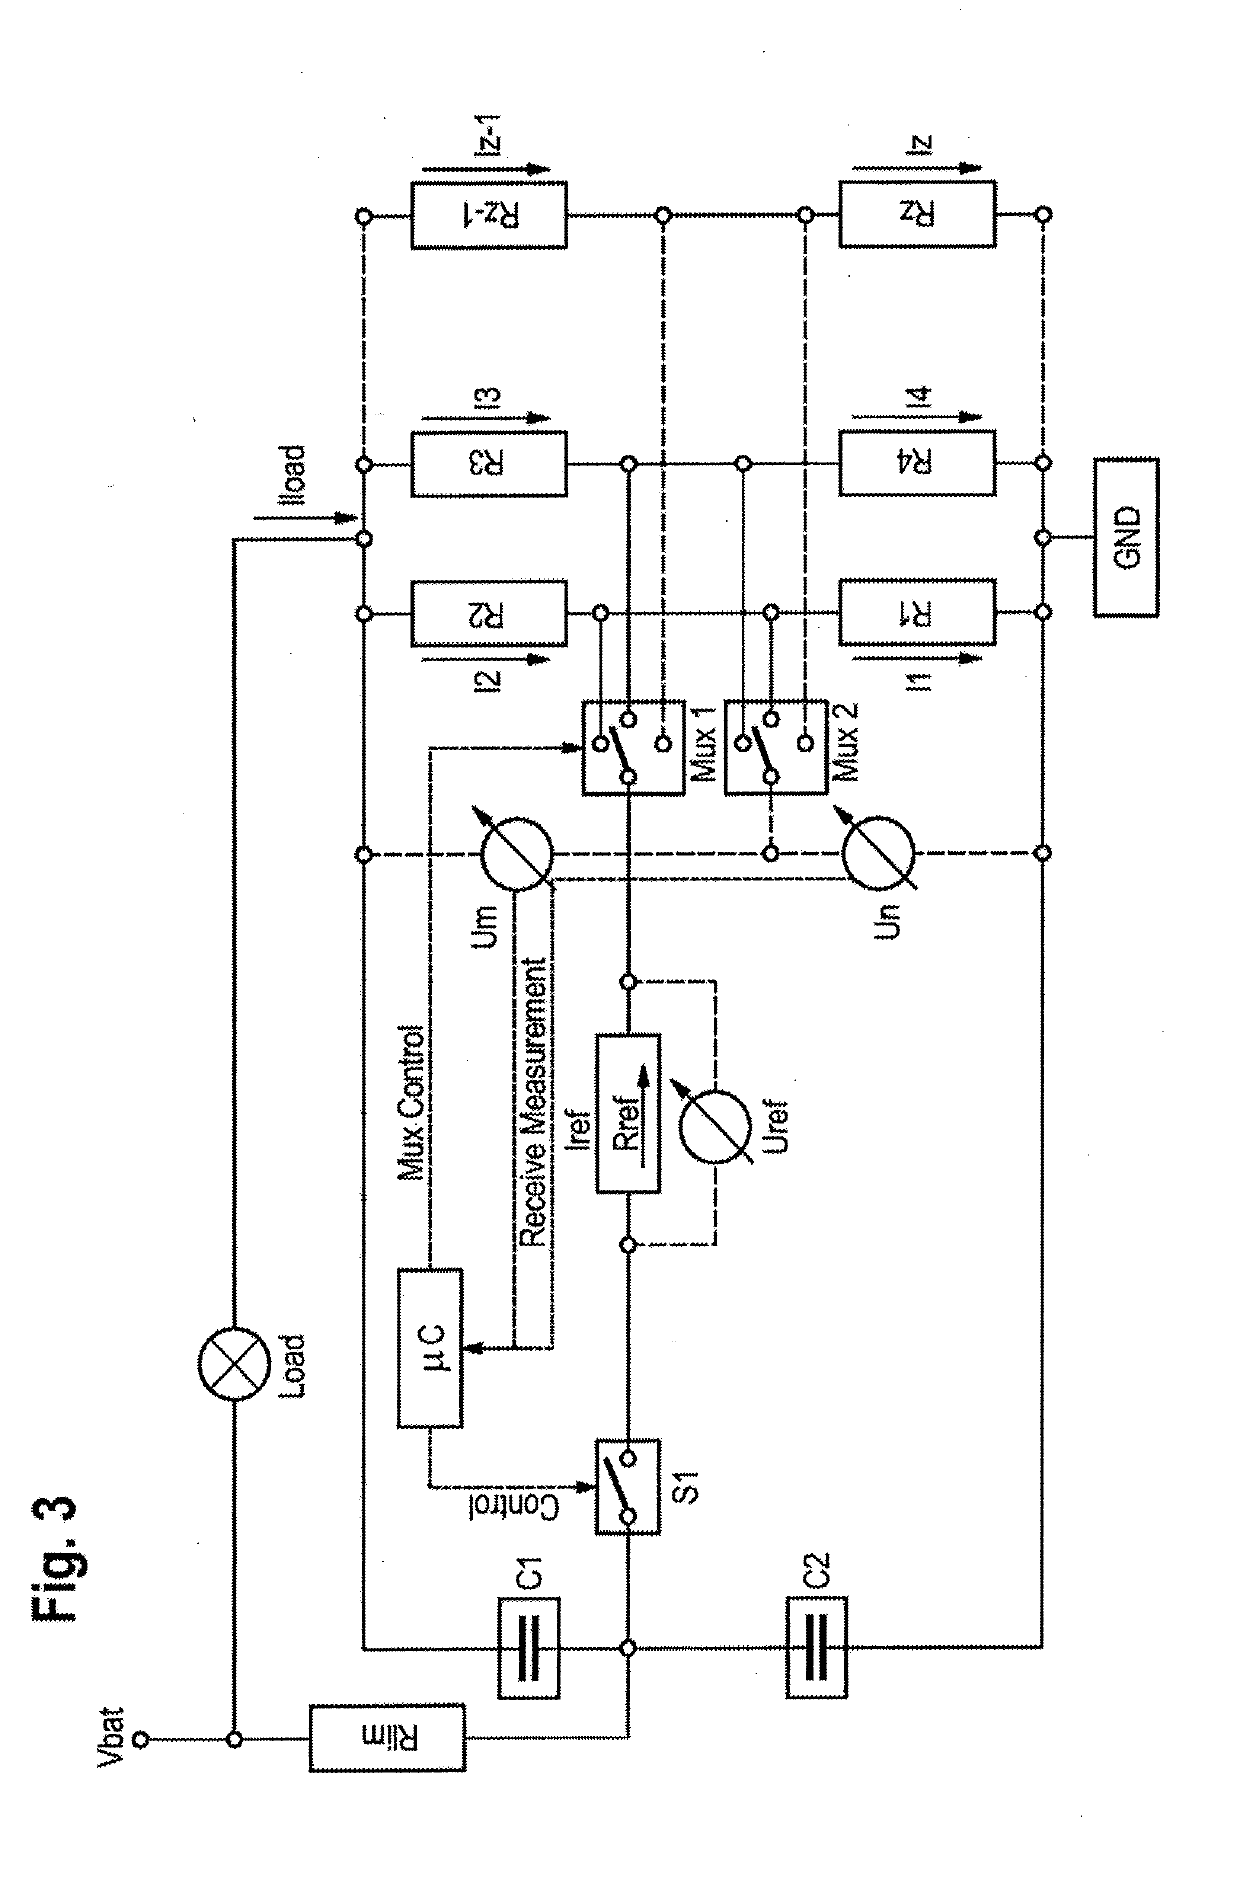 Method for determining a load current and battery sensor